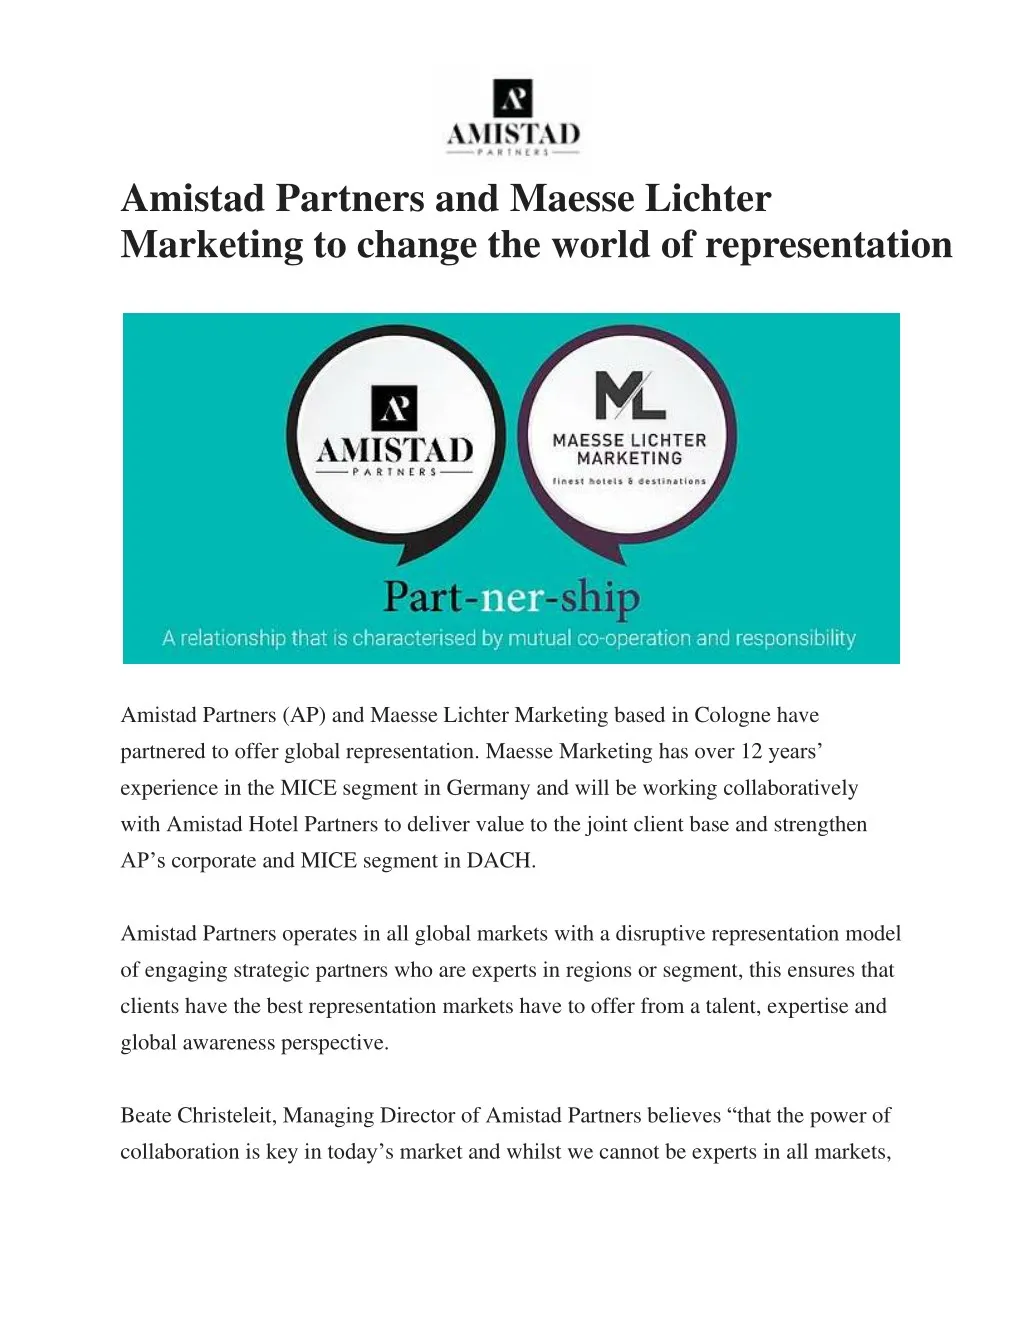 amistad partners and maesse lichter marketing